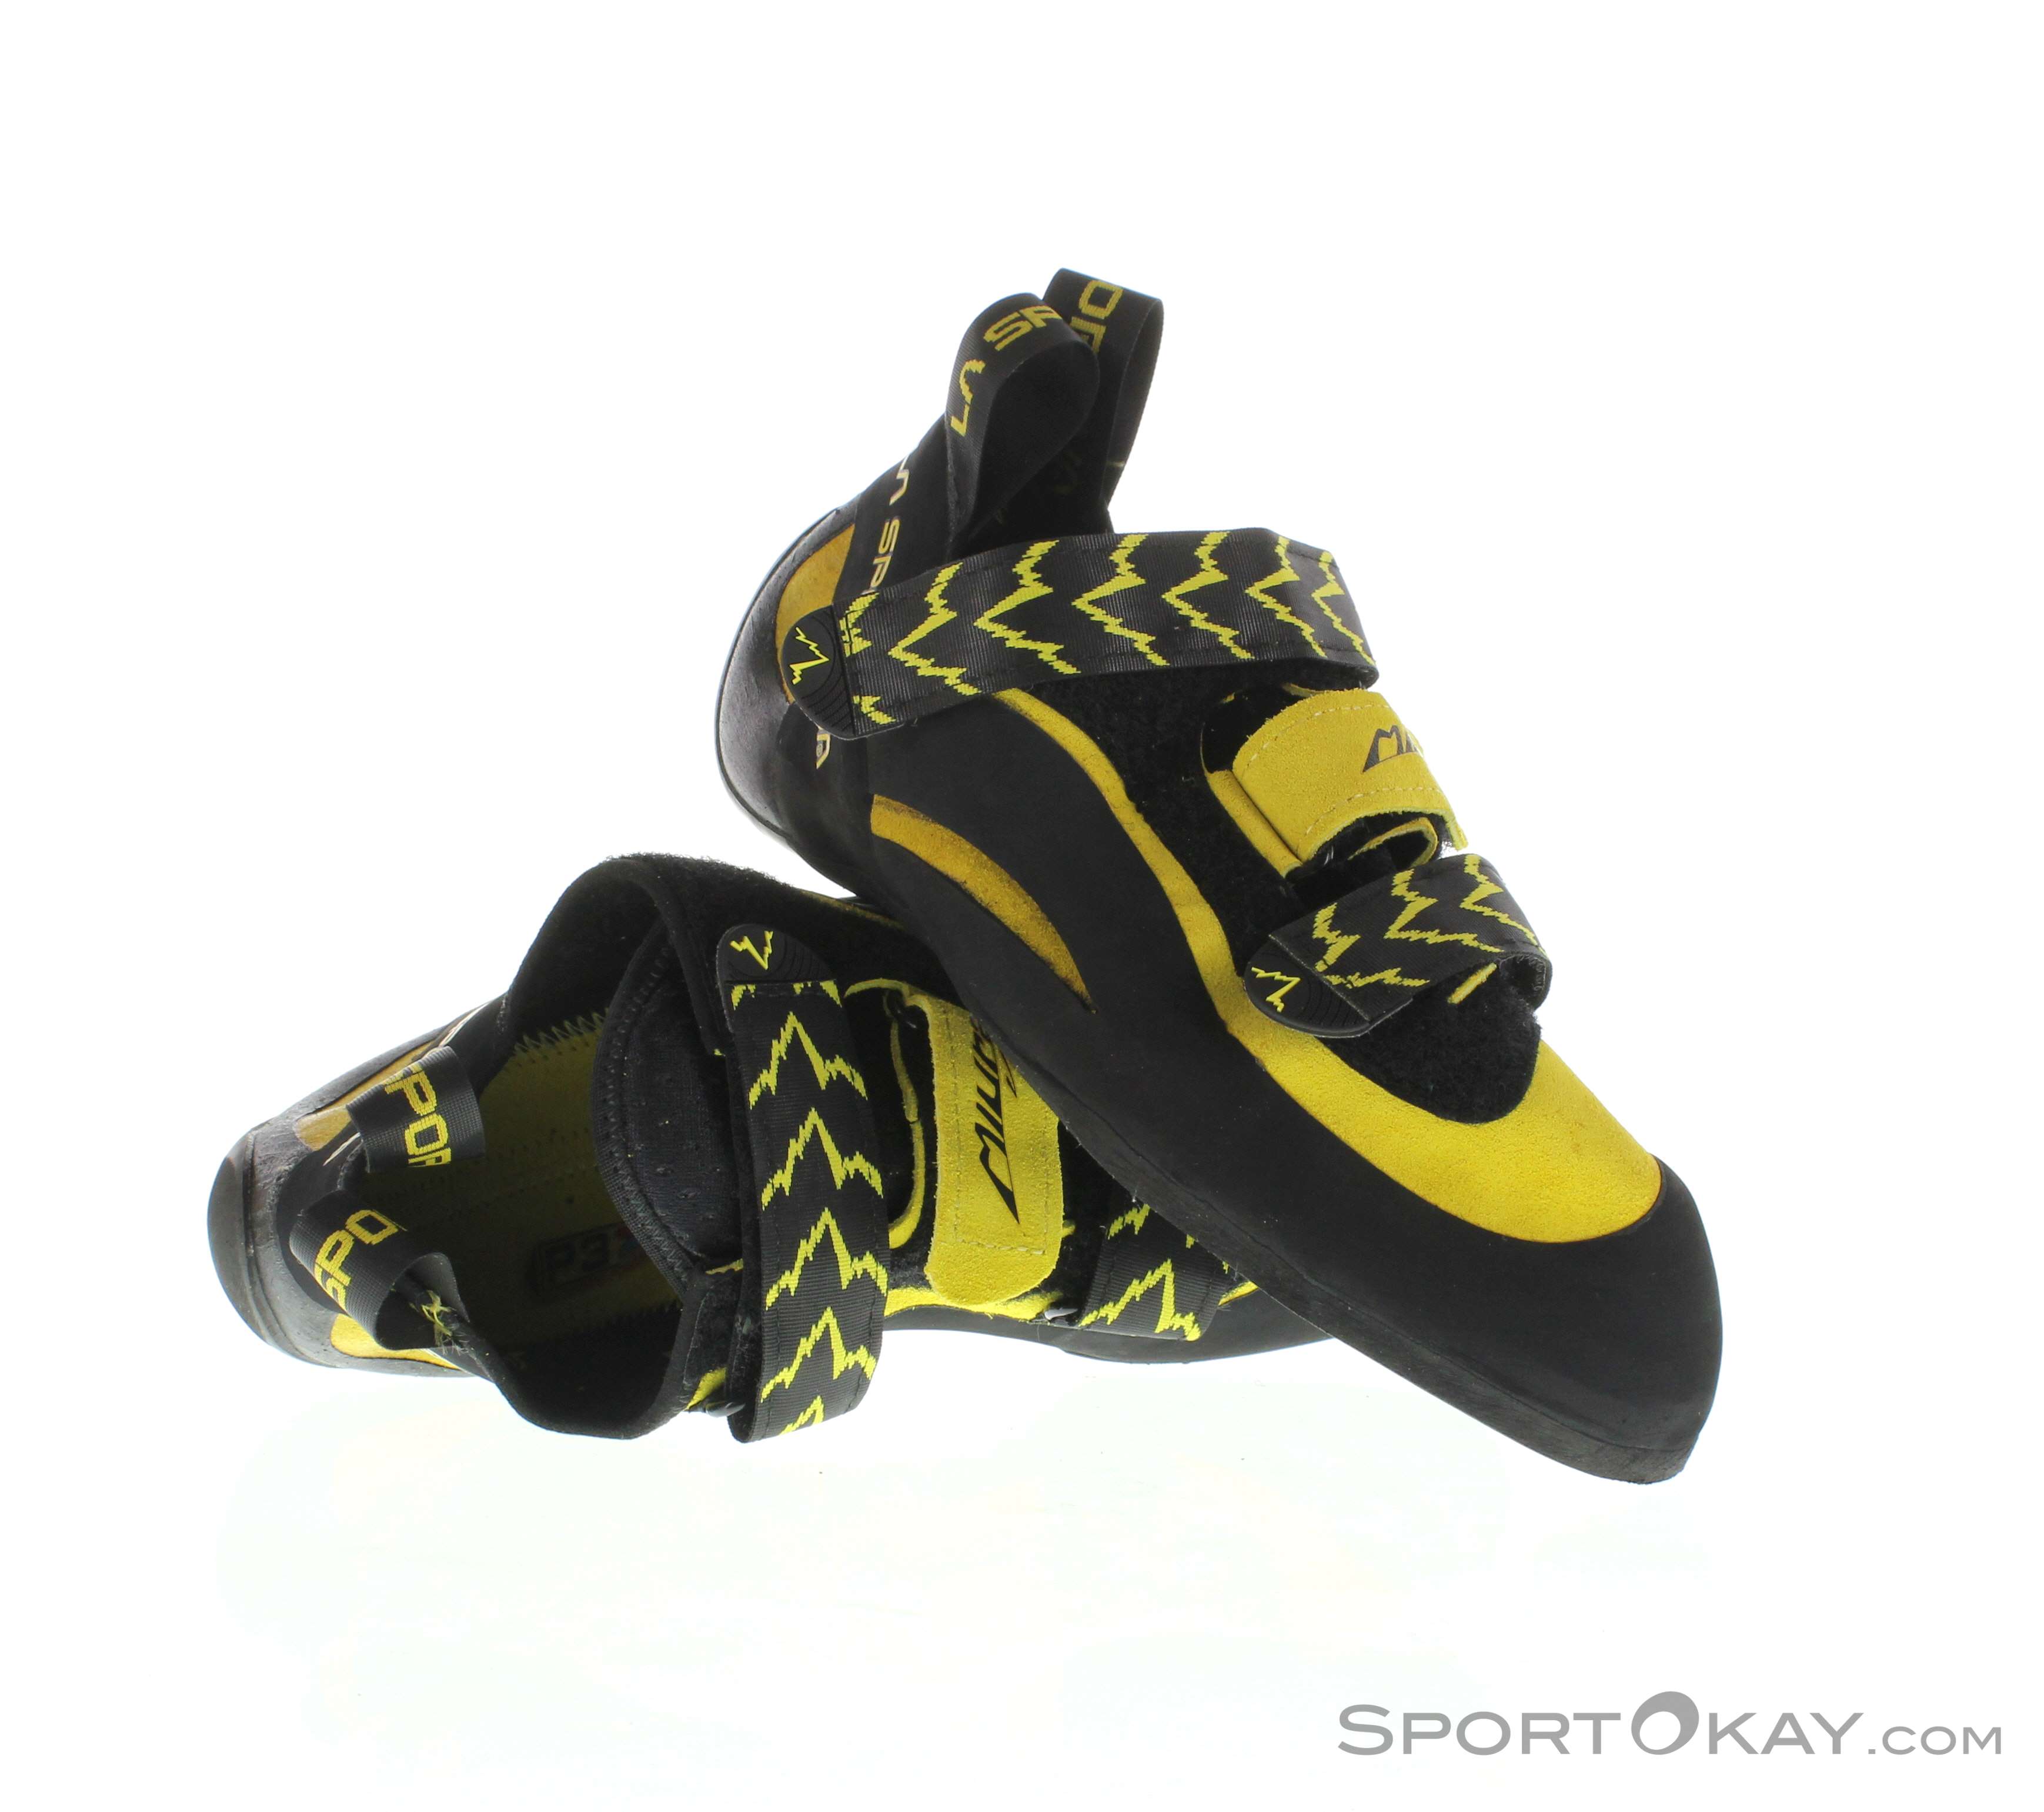 Buy > mens climbing shoes > in stock